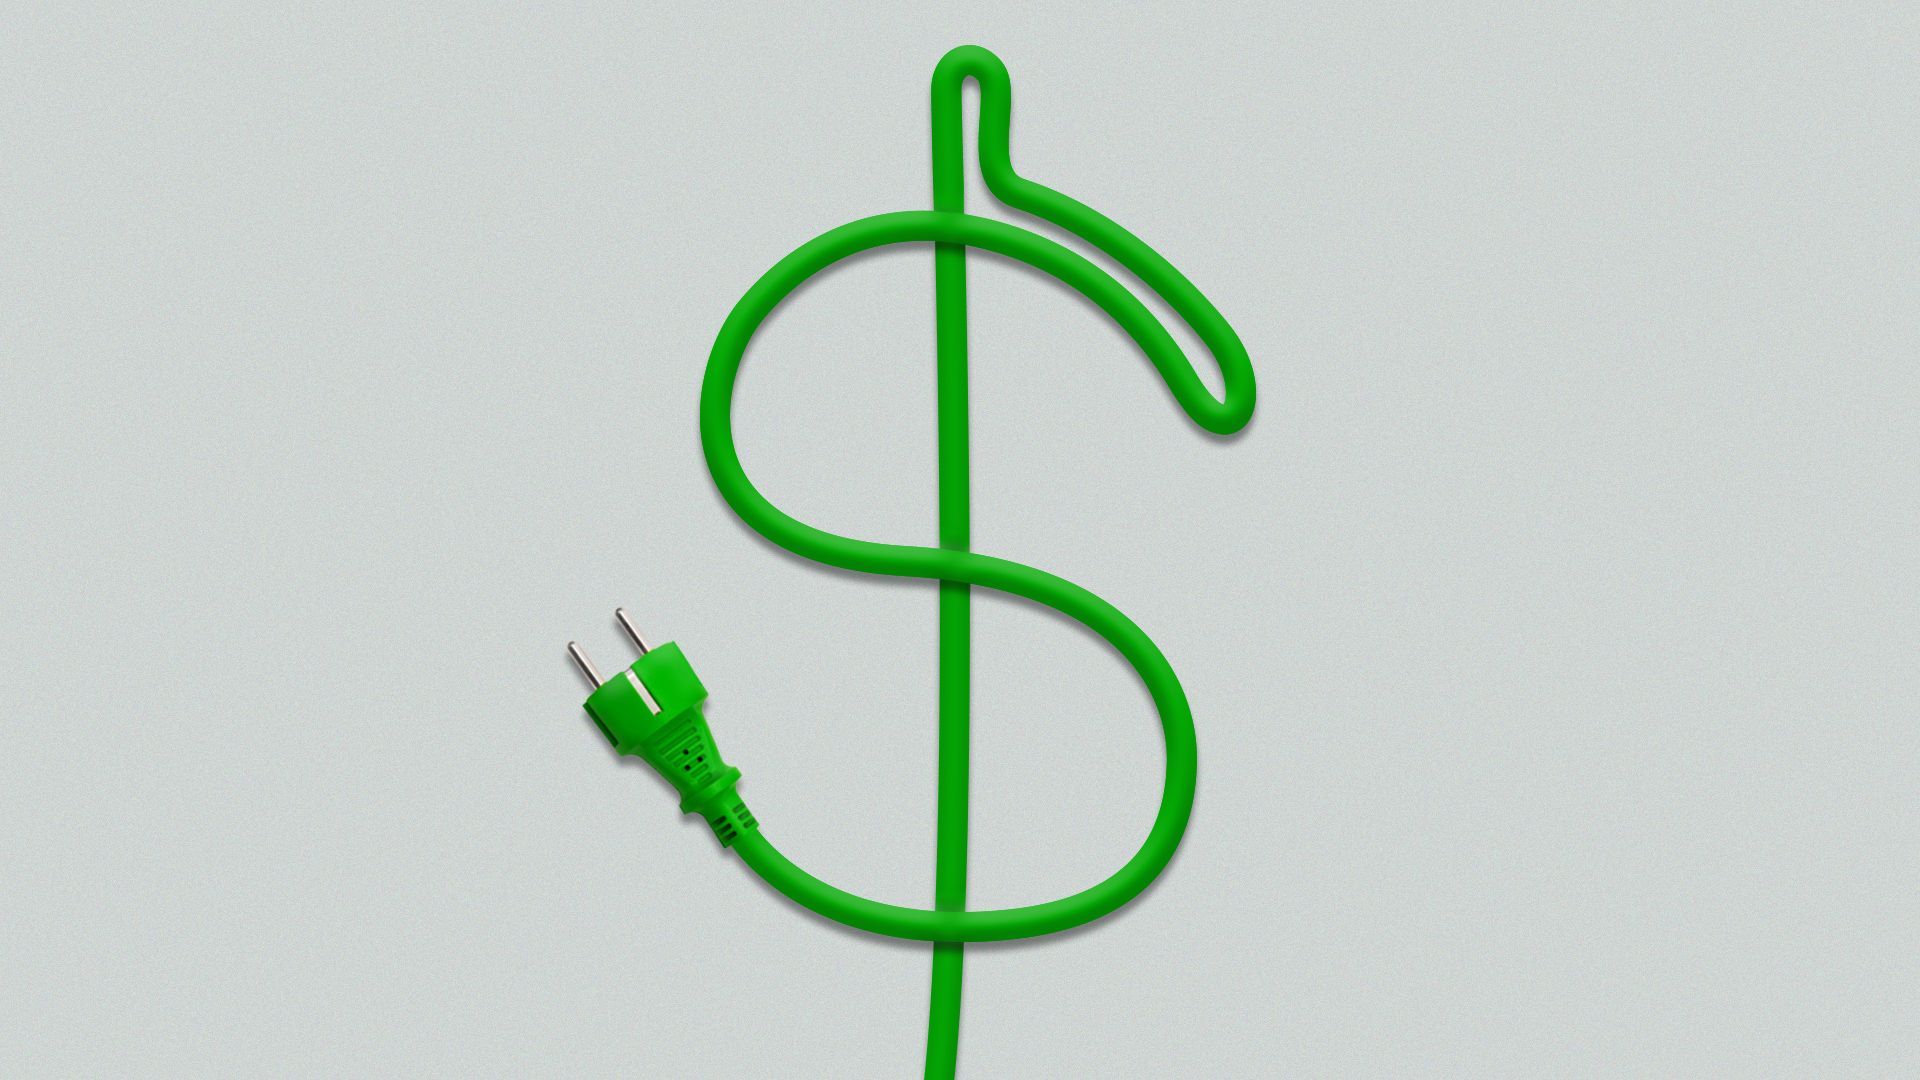 Illustration of an electrical plug and cord forming the shape of a dollar sign.